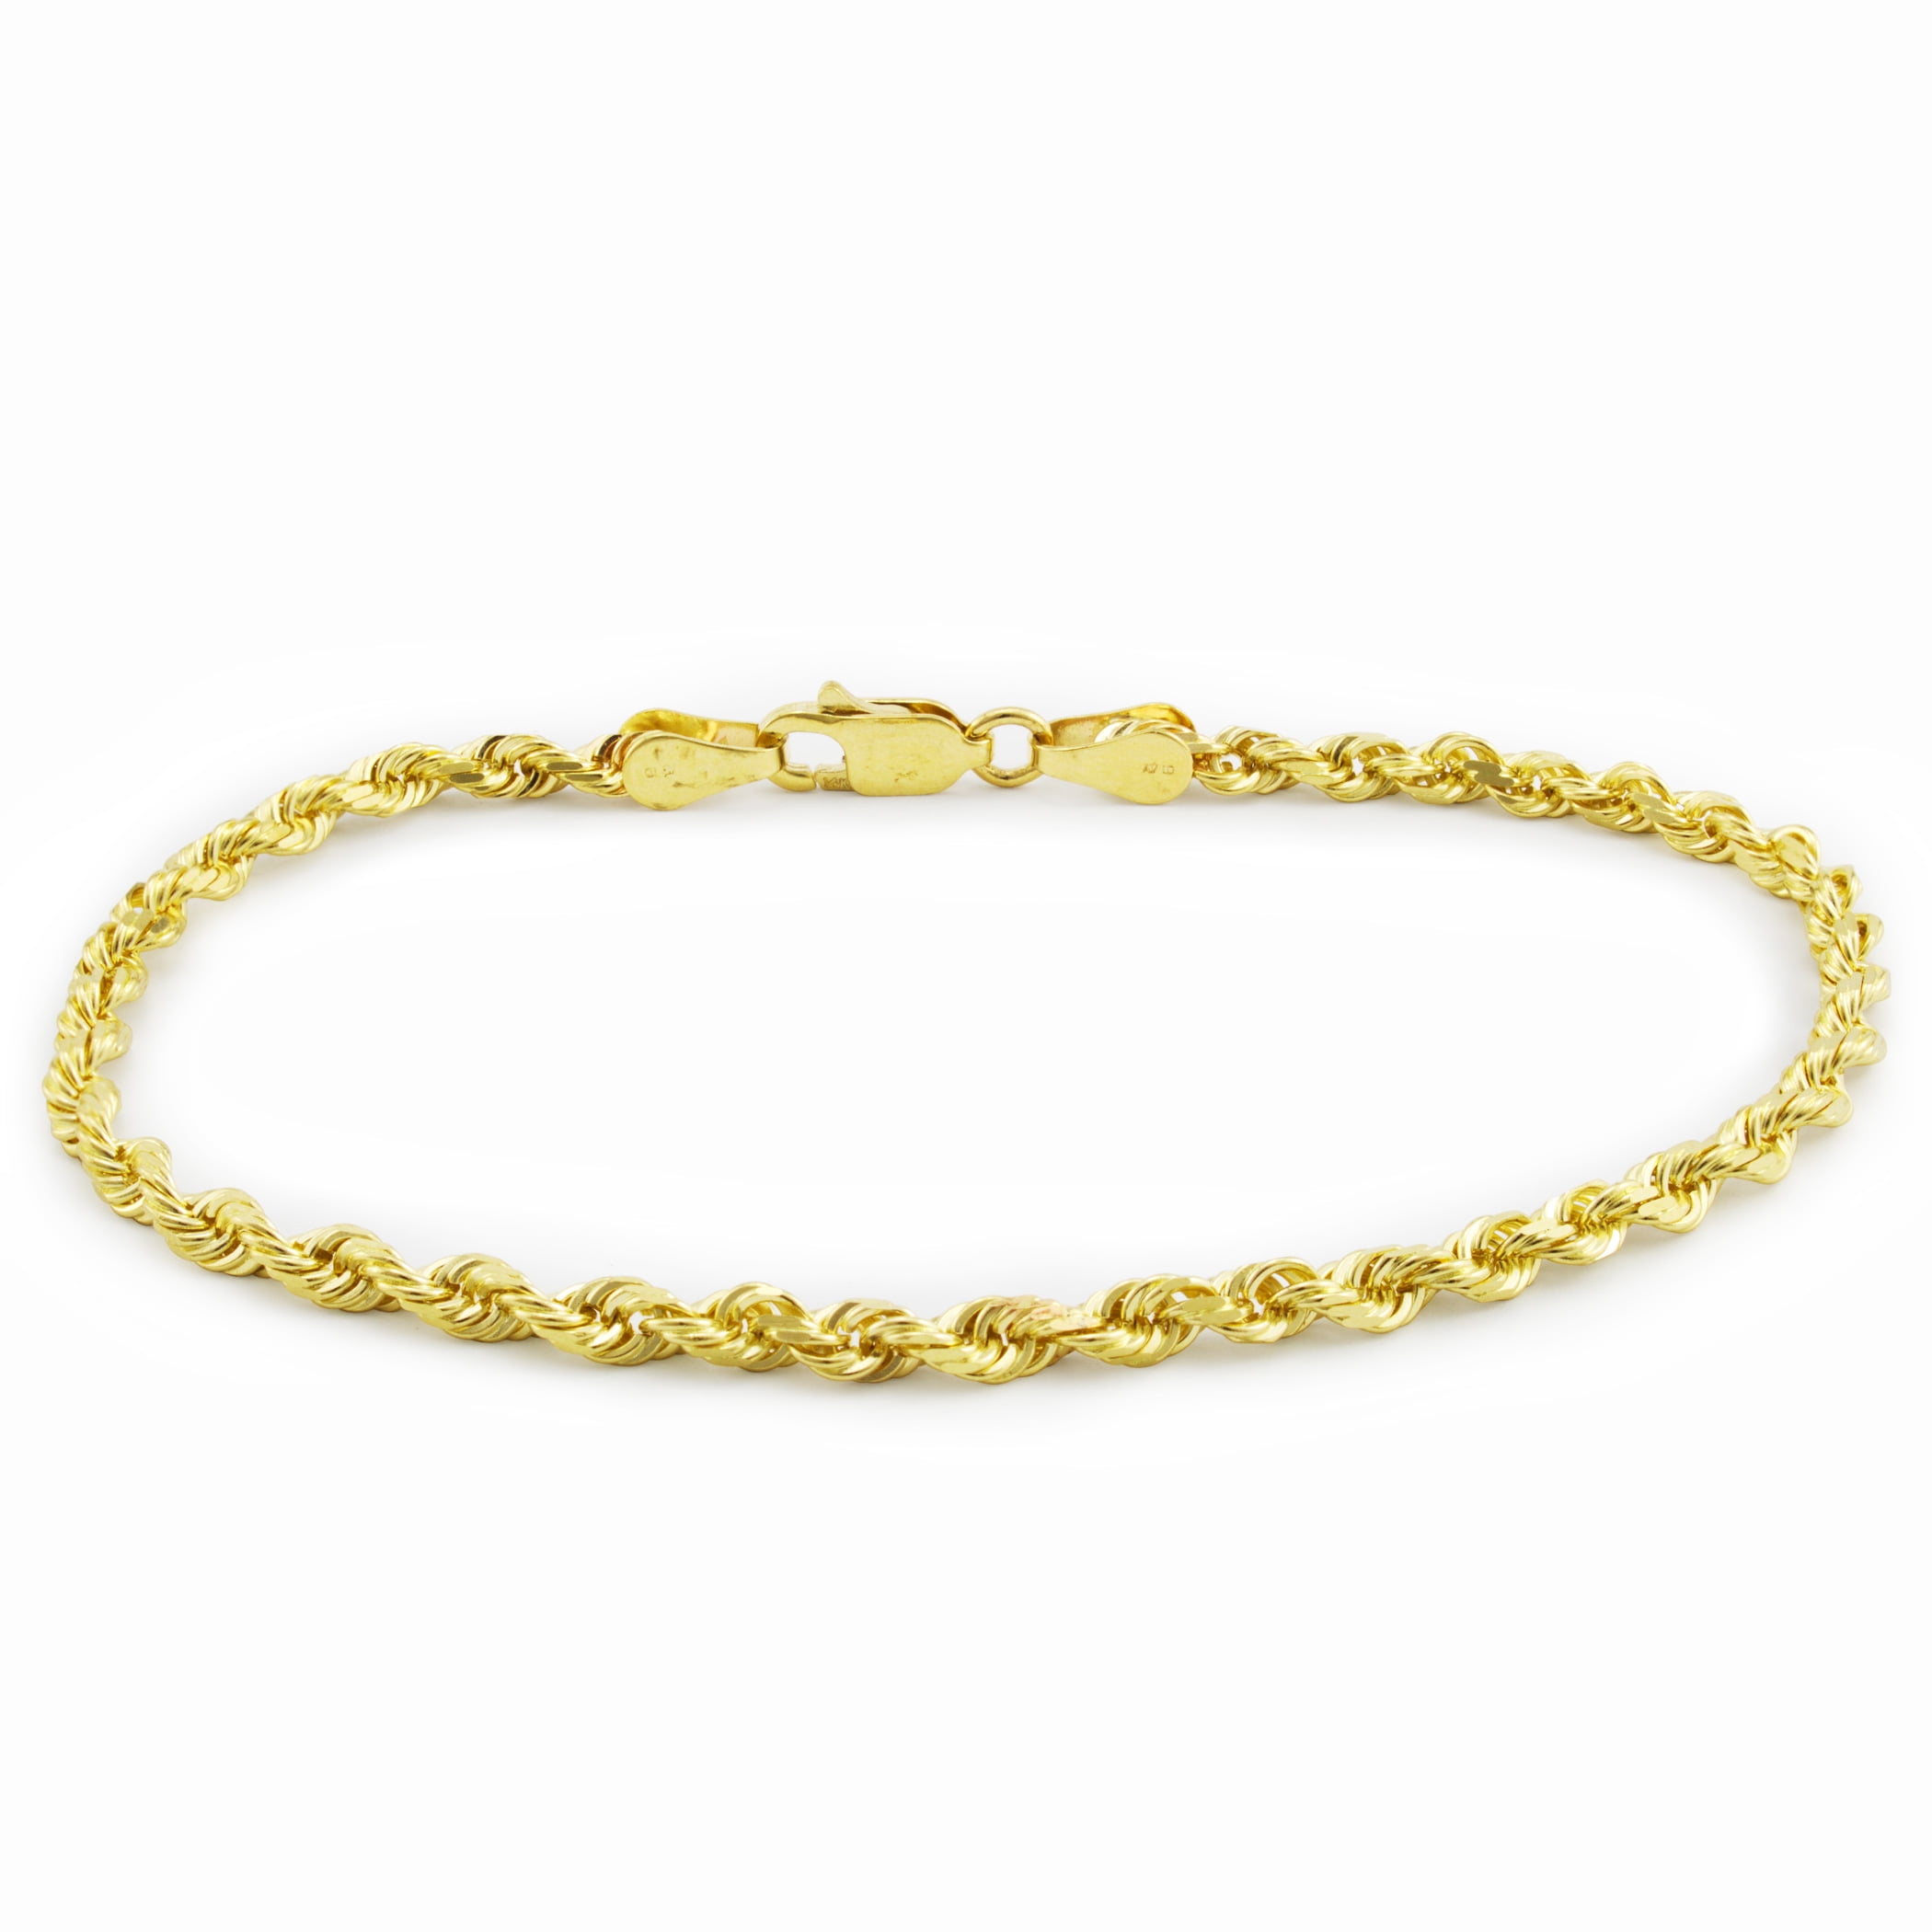 Nuragold - 14k Yellow Gold Womens 2mm Solid Rope Chain Bracelet or